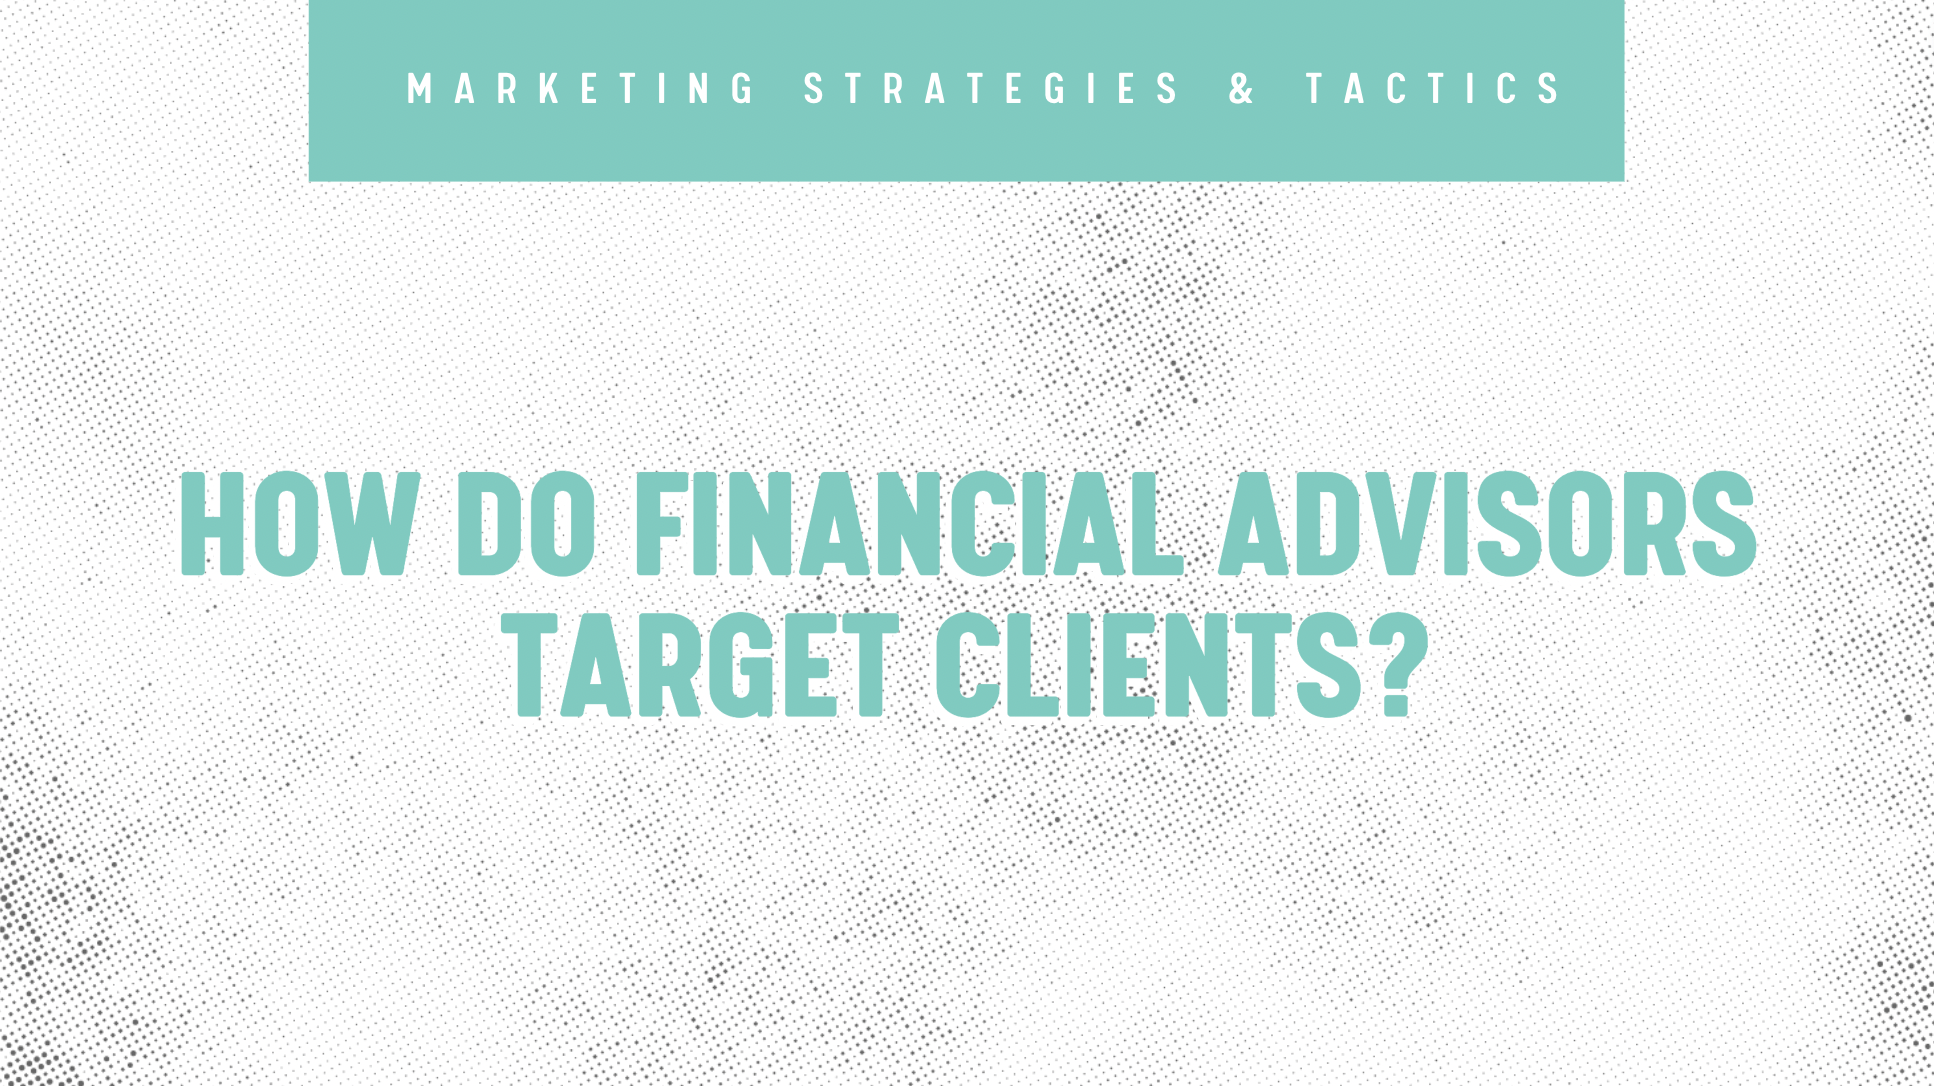 How Do Financial Advisors Target Clients?